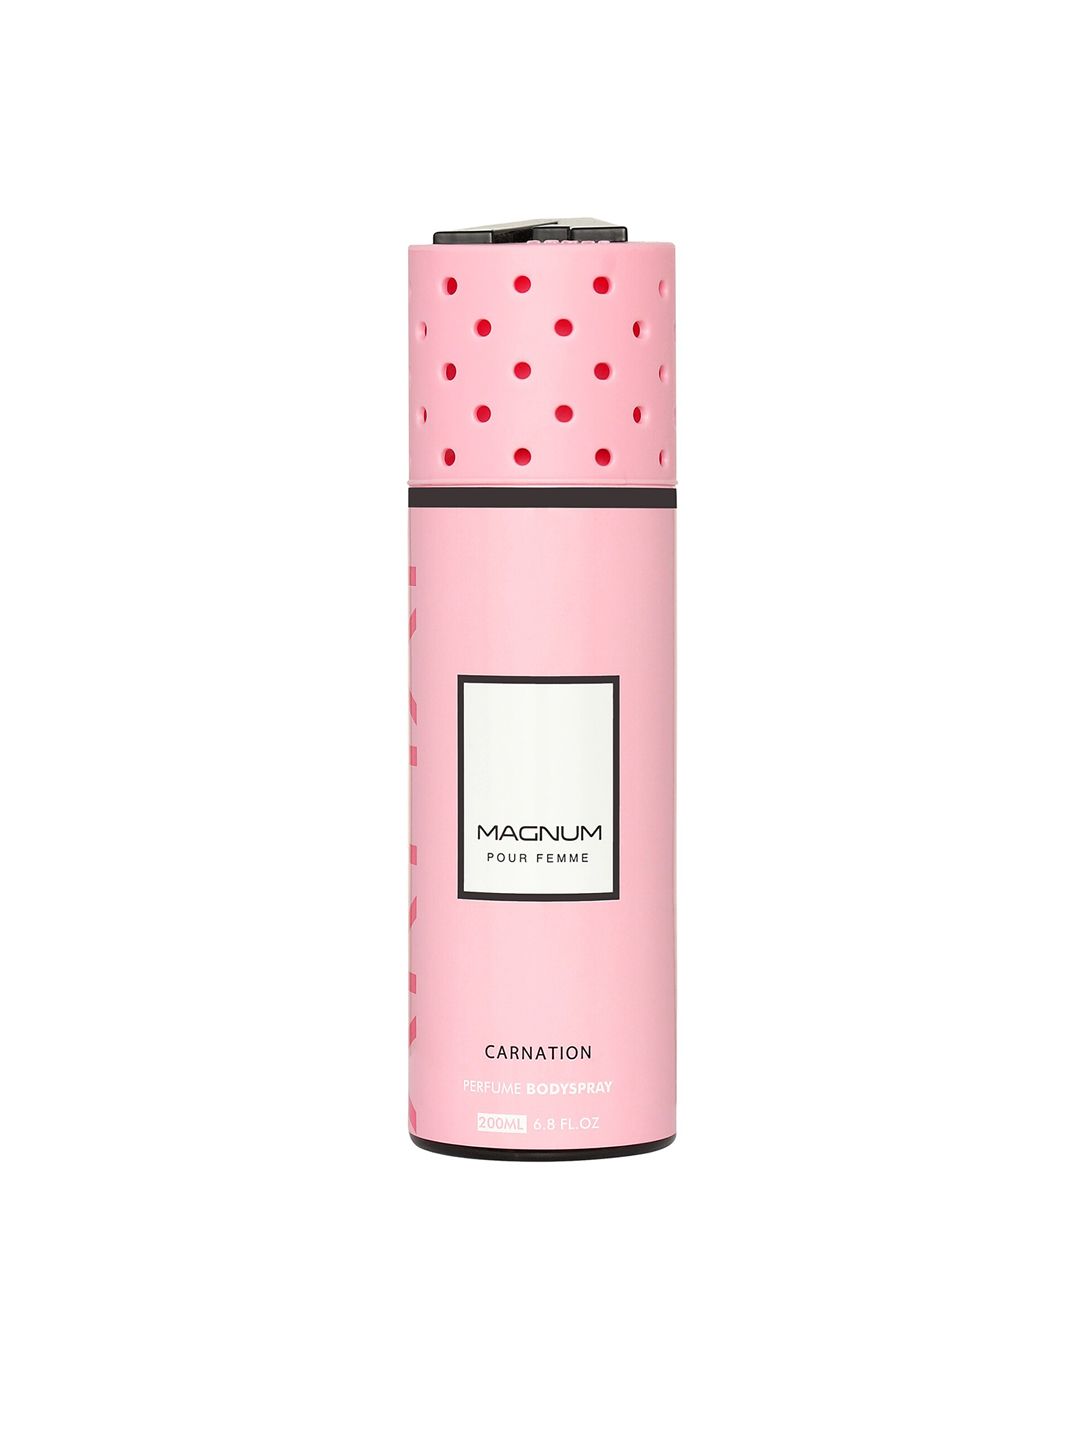 Armaf Magnum Pour Femme Carnation Perfume Body Spray 200 ml Price in India